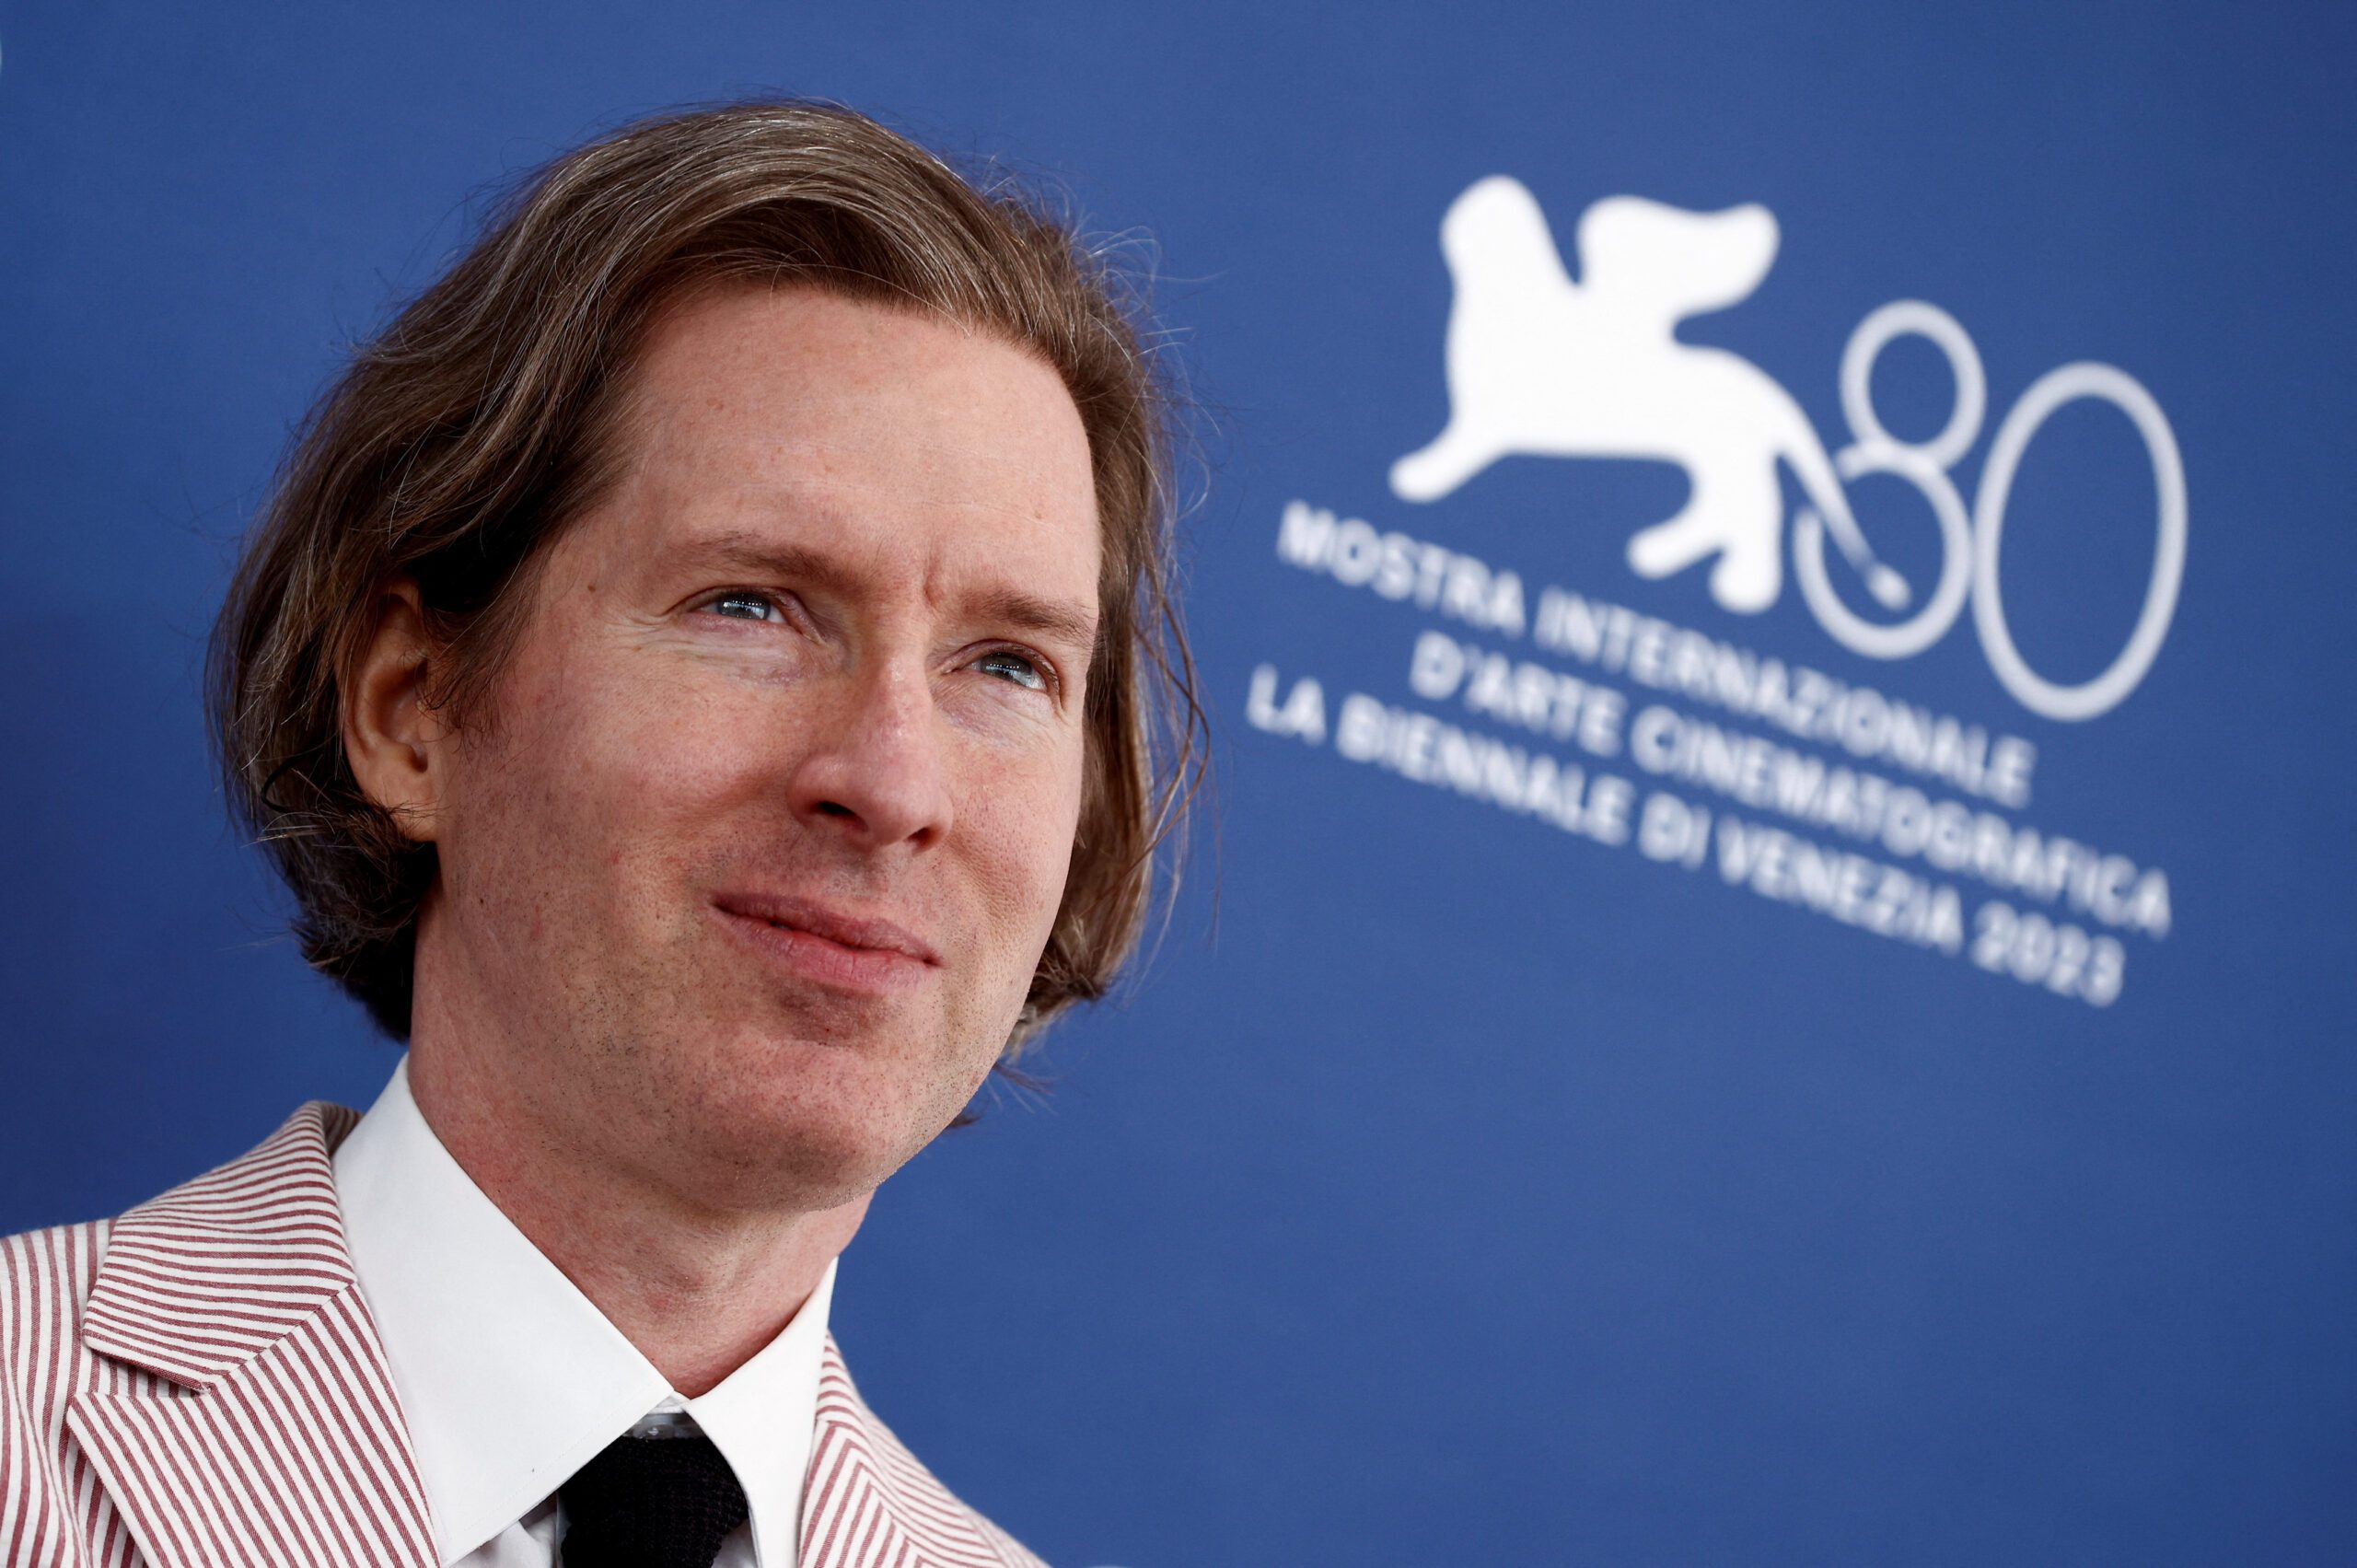 Roald Dahl shouldn’t be touched, director Wes Anderson tells Venice